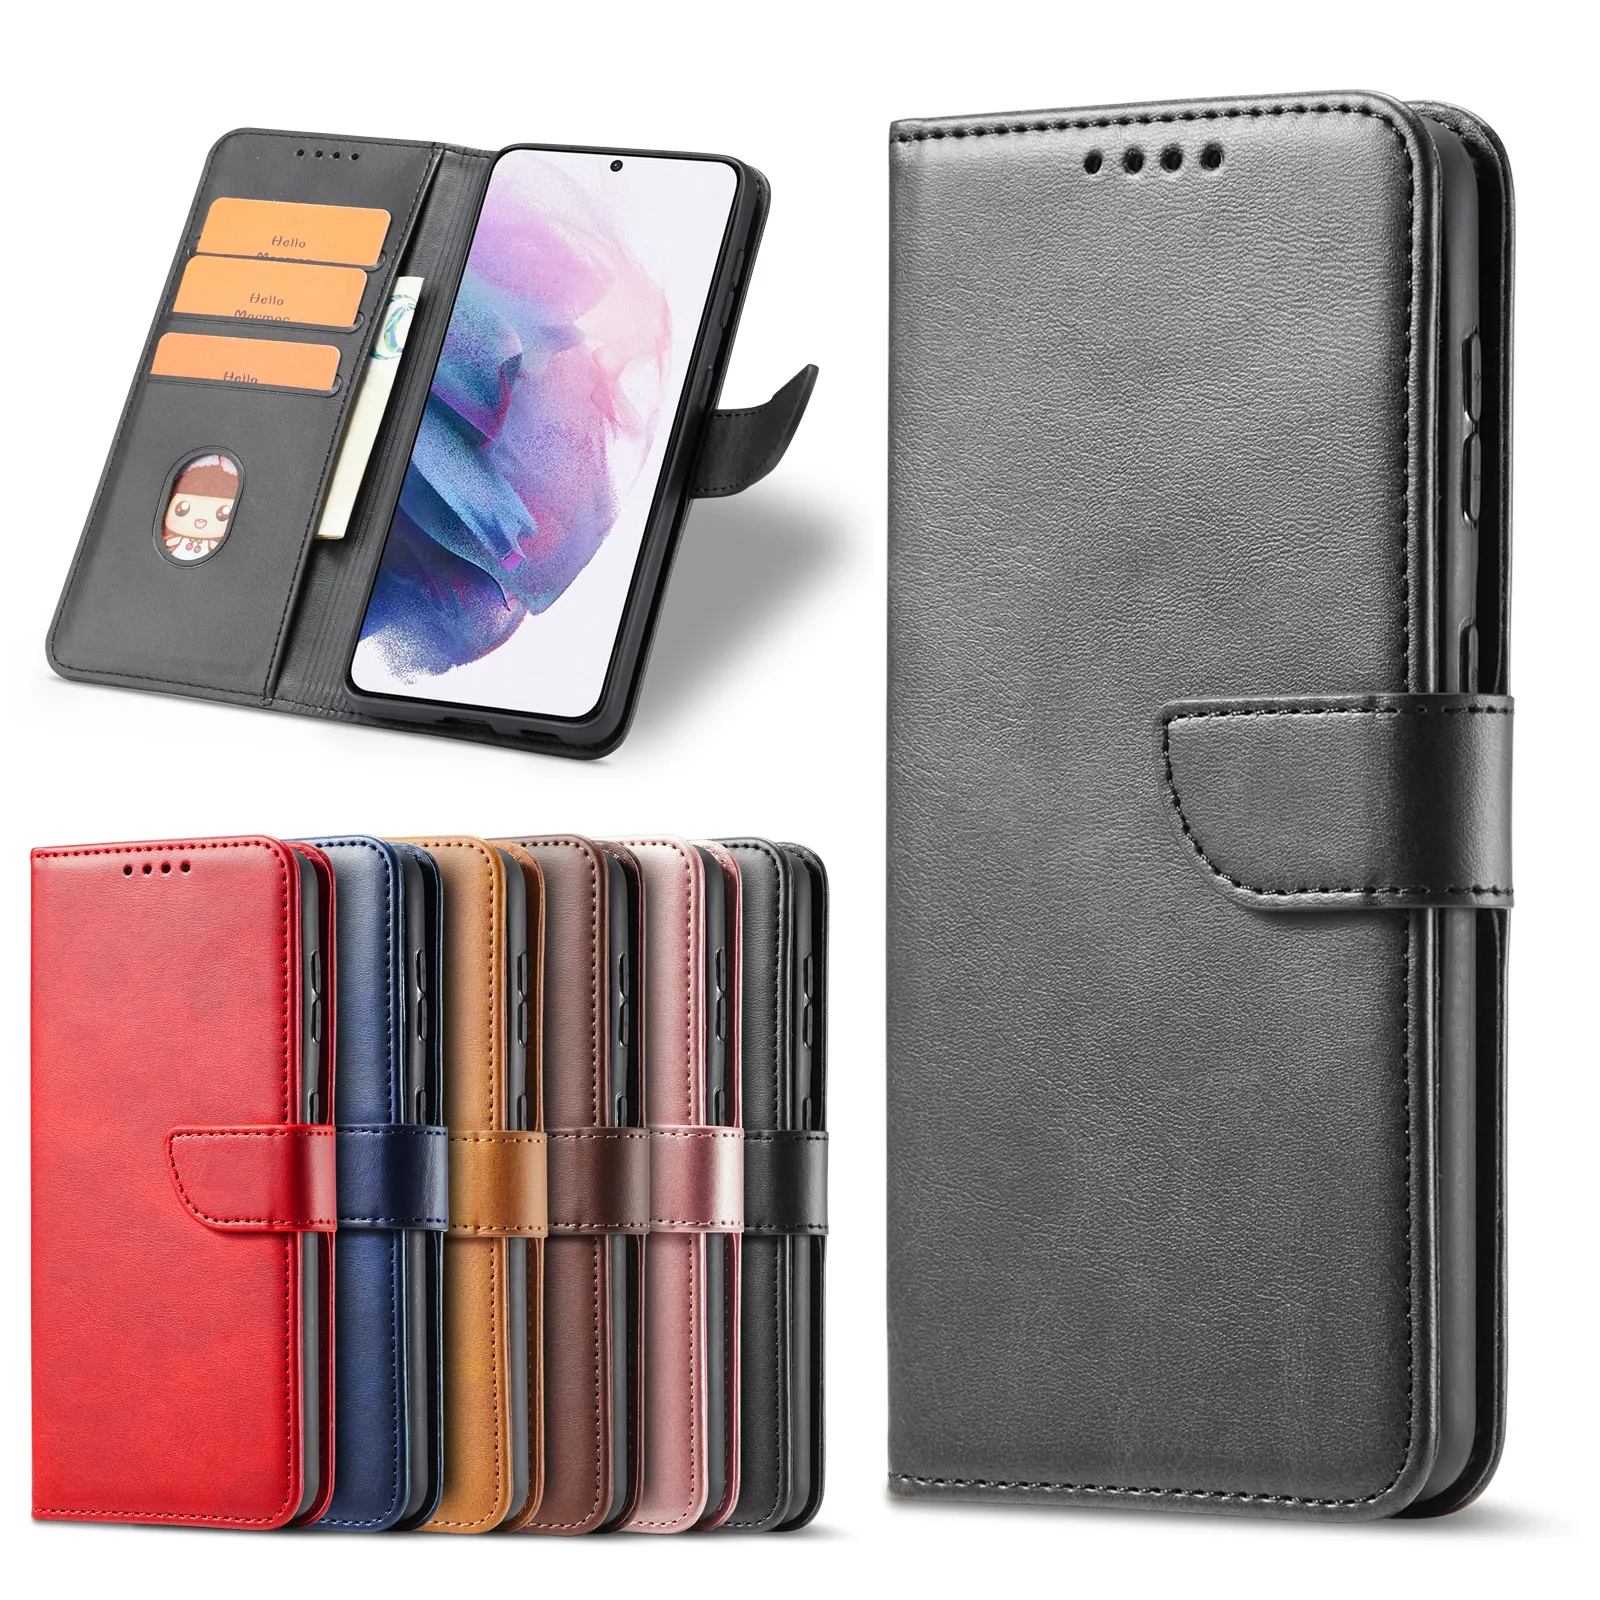 ShanHai Leather Wallet Case for Samsung Galaxy S20 Note20 Ultra S20 FE S10 Plus A71 A51 5G A41 A31 A21s A11 Flip Cover A40 A02S